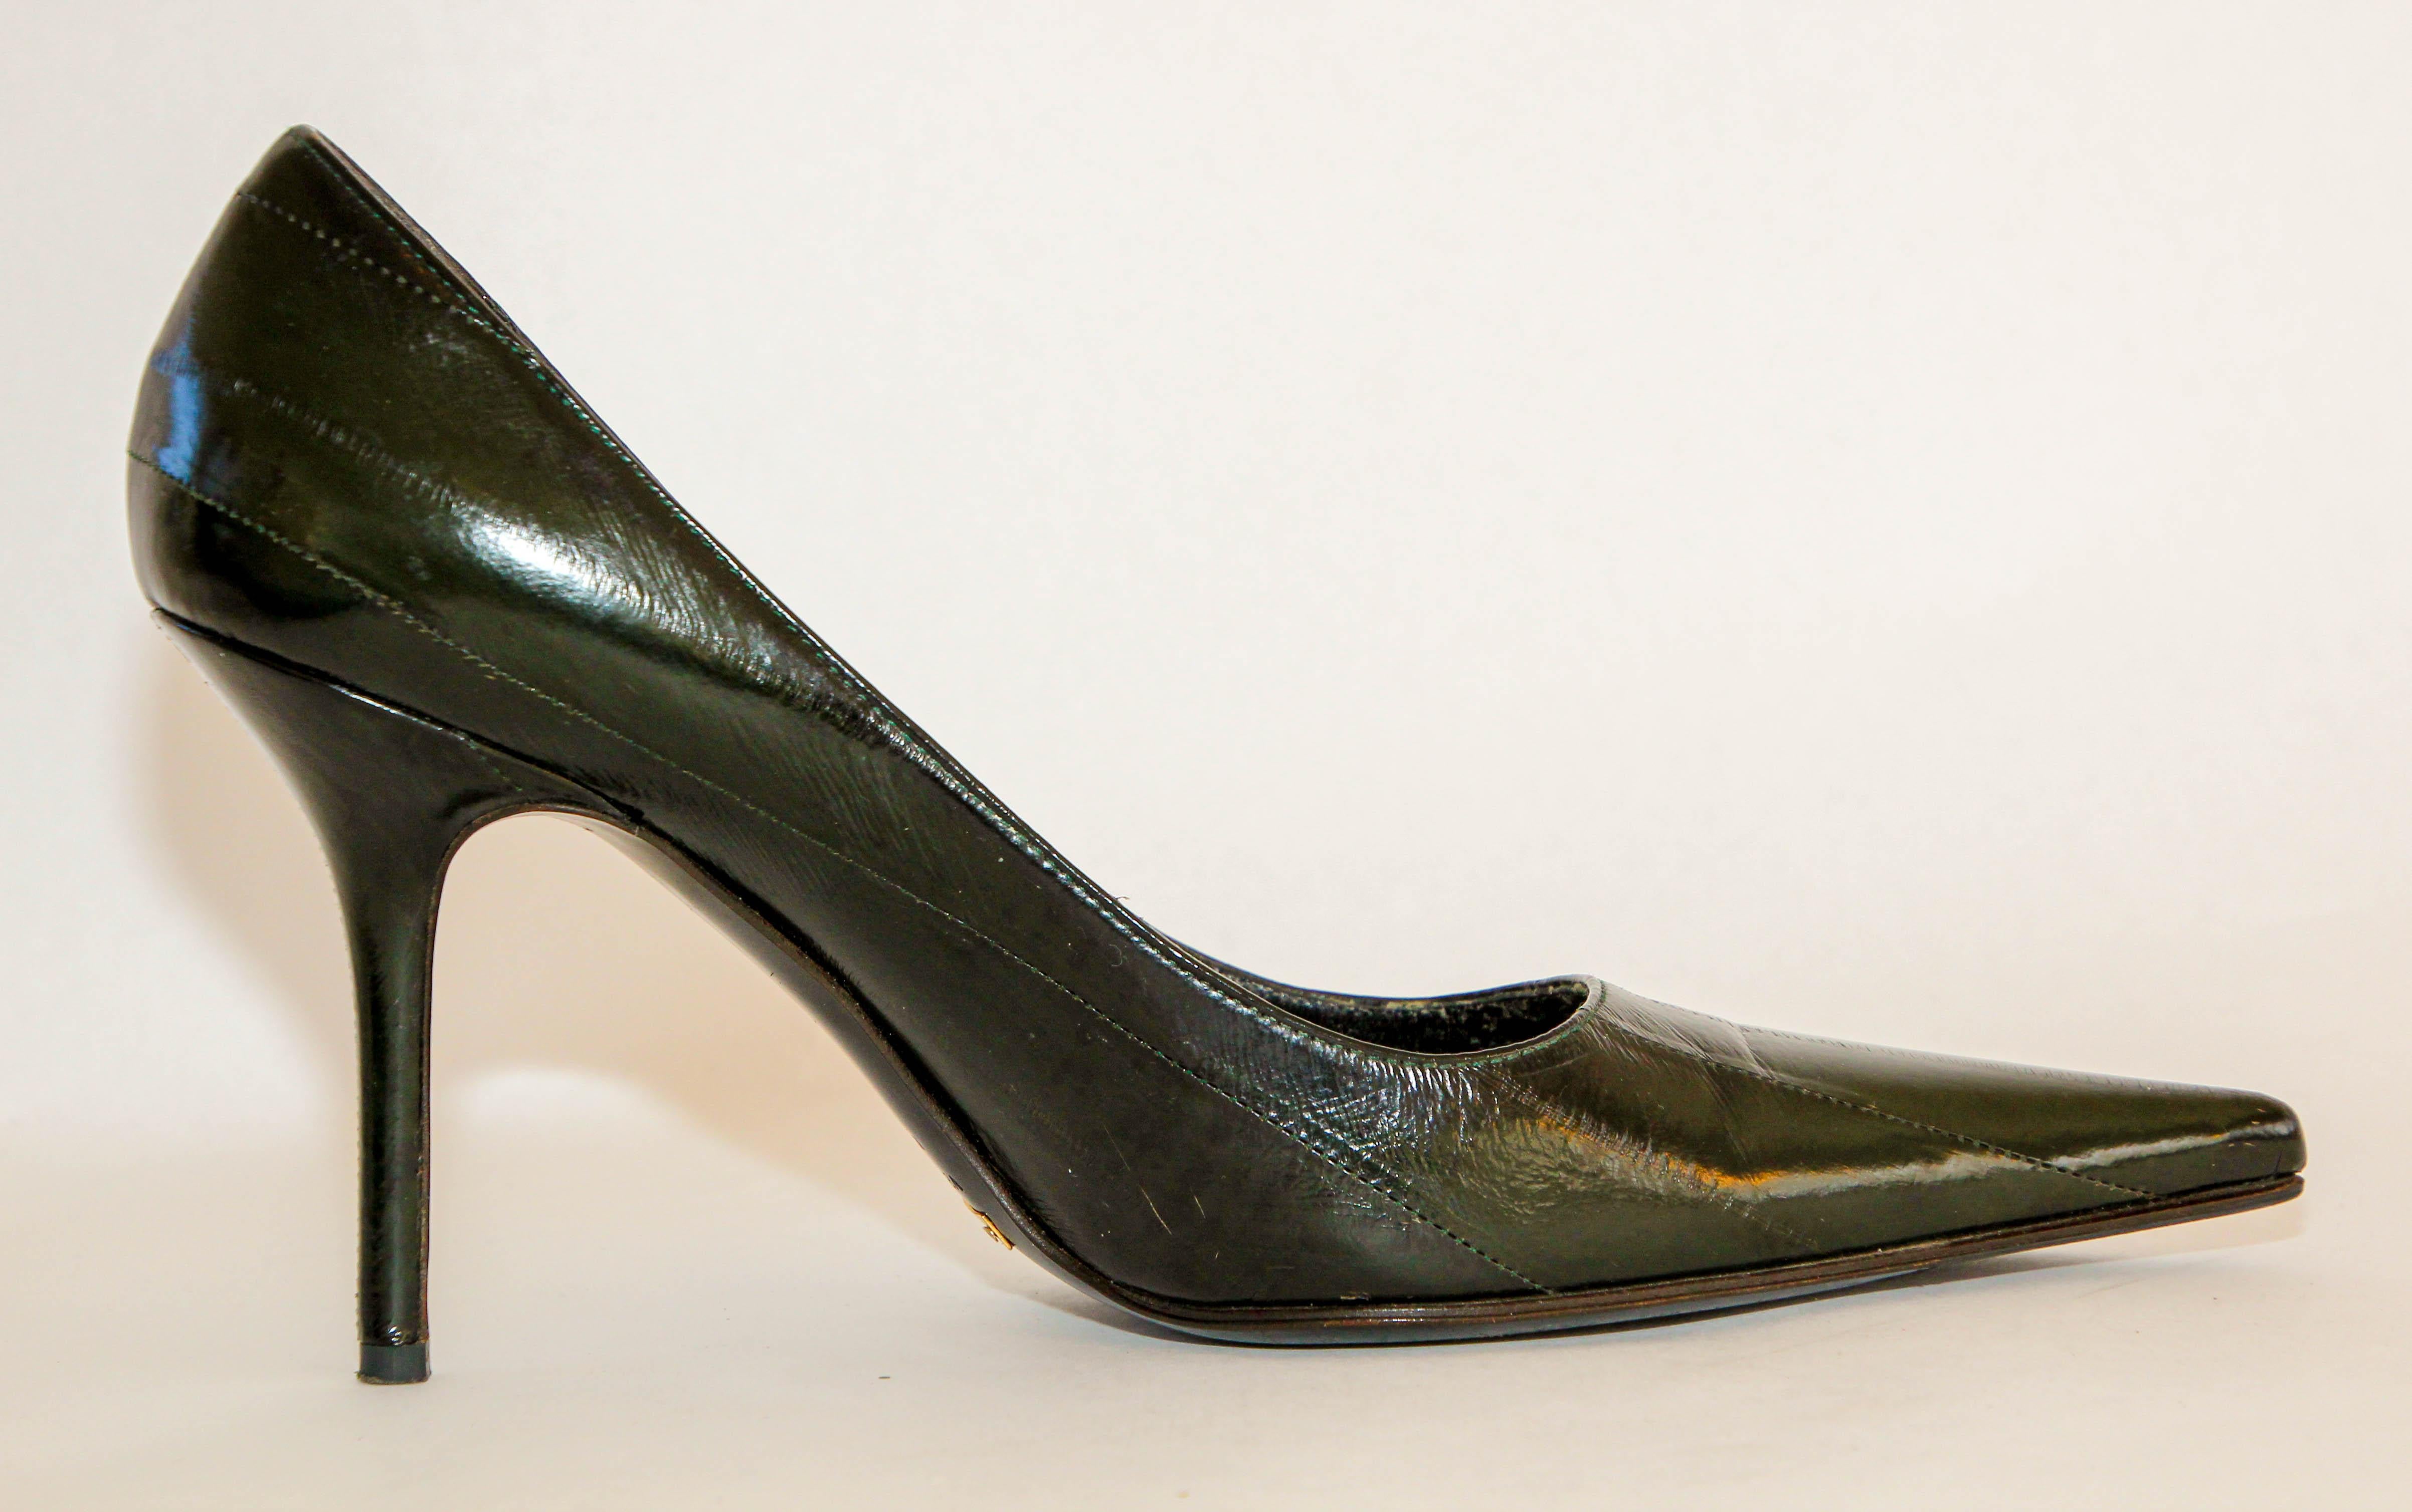 Dolce & Gabbana Brown Eel Pumps Size: 39 EU In Good Condition For Sale In North Hollywood, CA